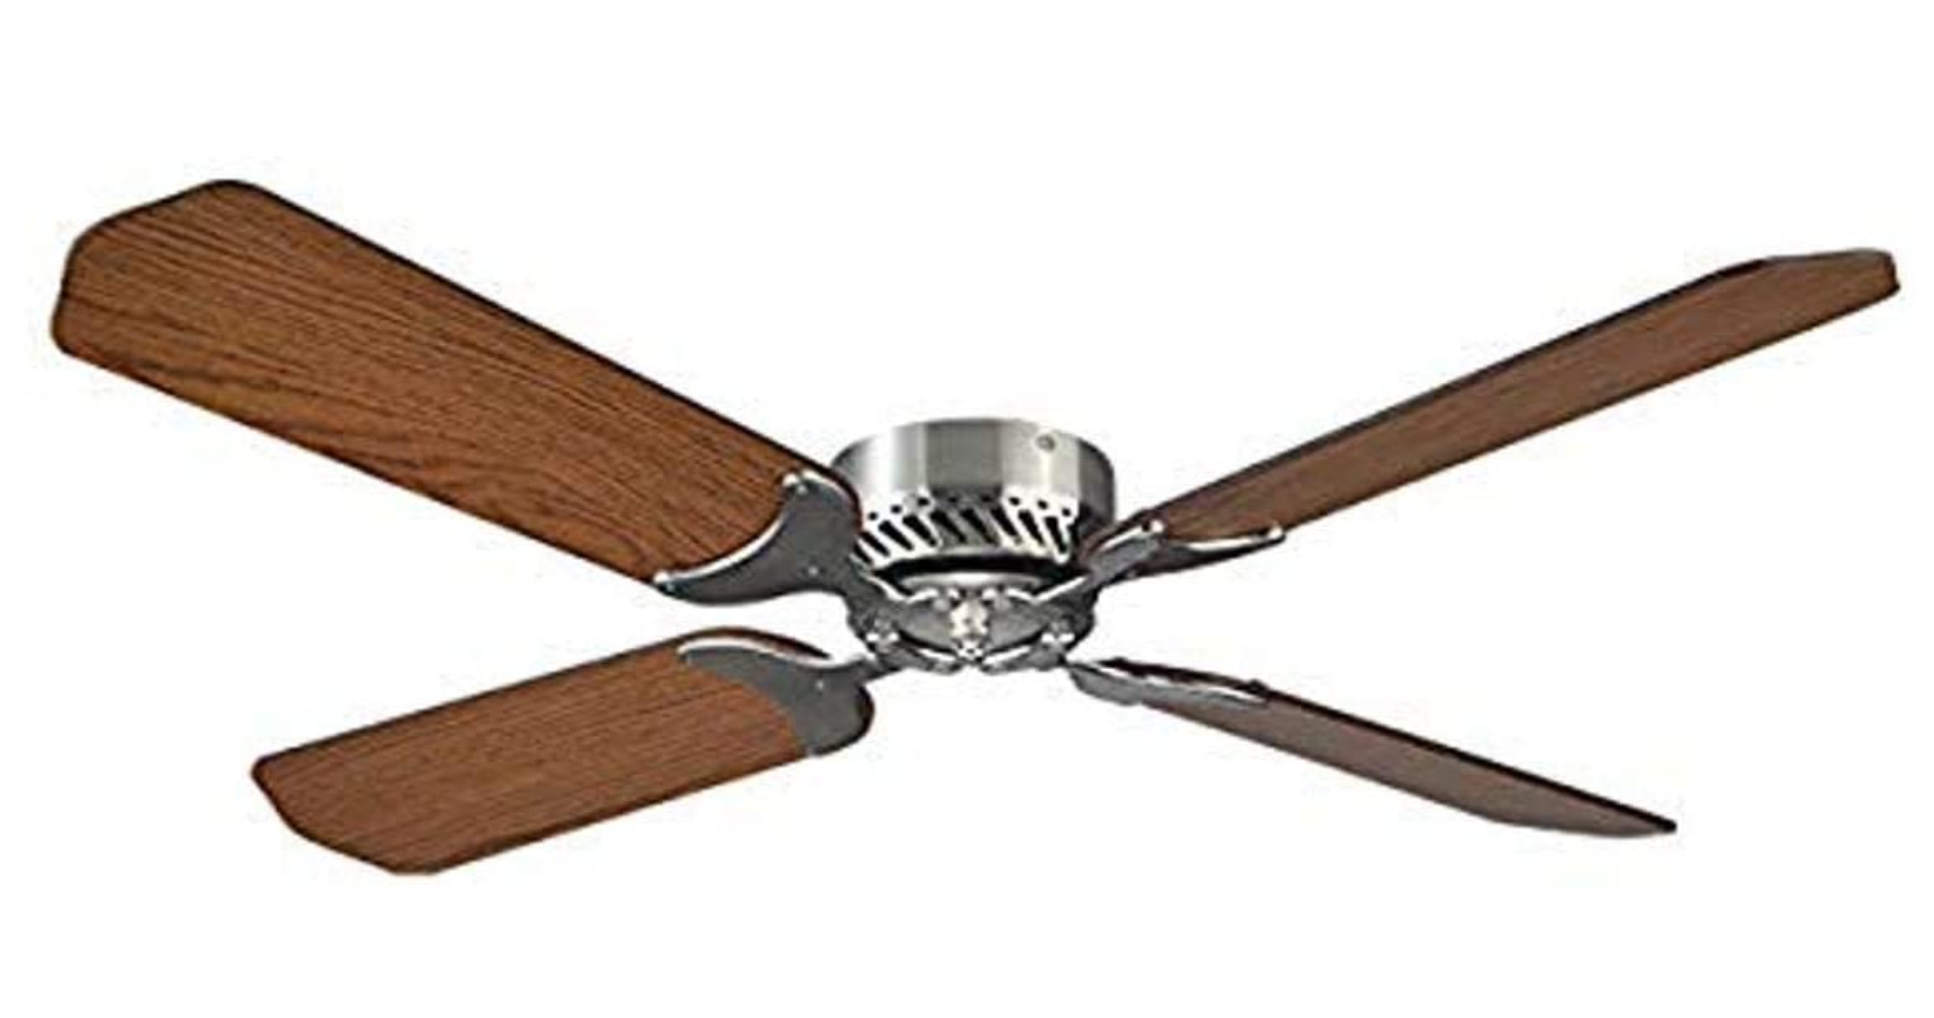 4 Best 12V Ceiling Fans Review in 2023 (Buying Guide Included)